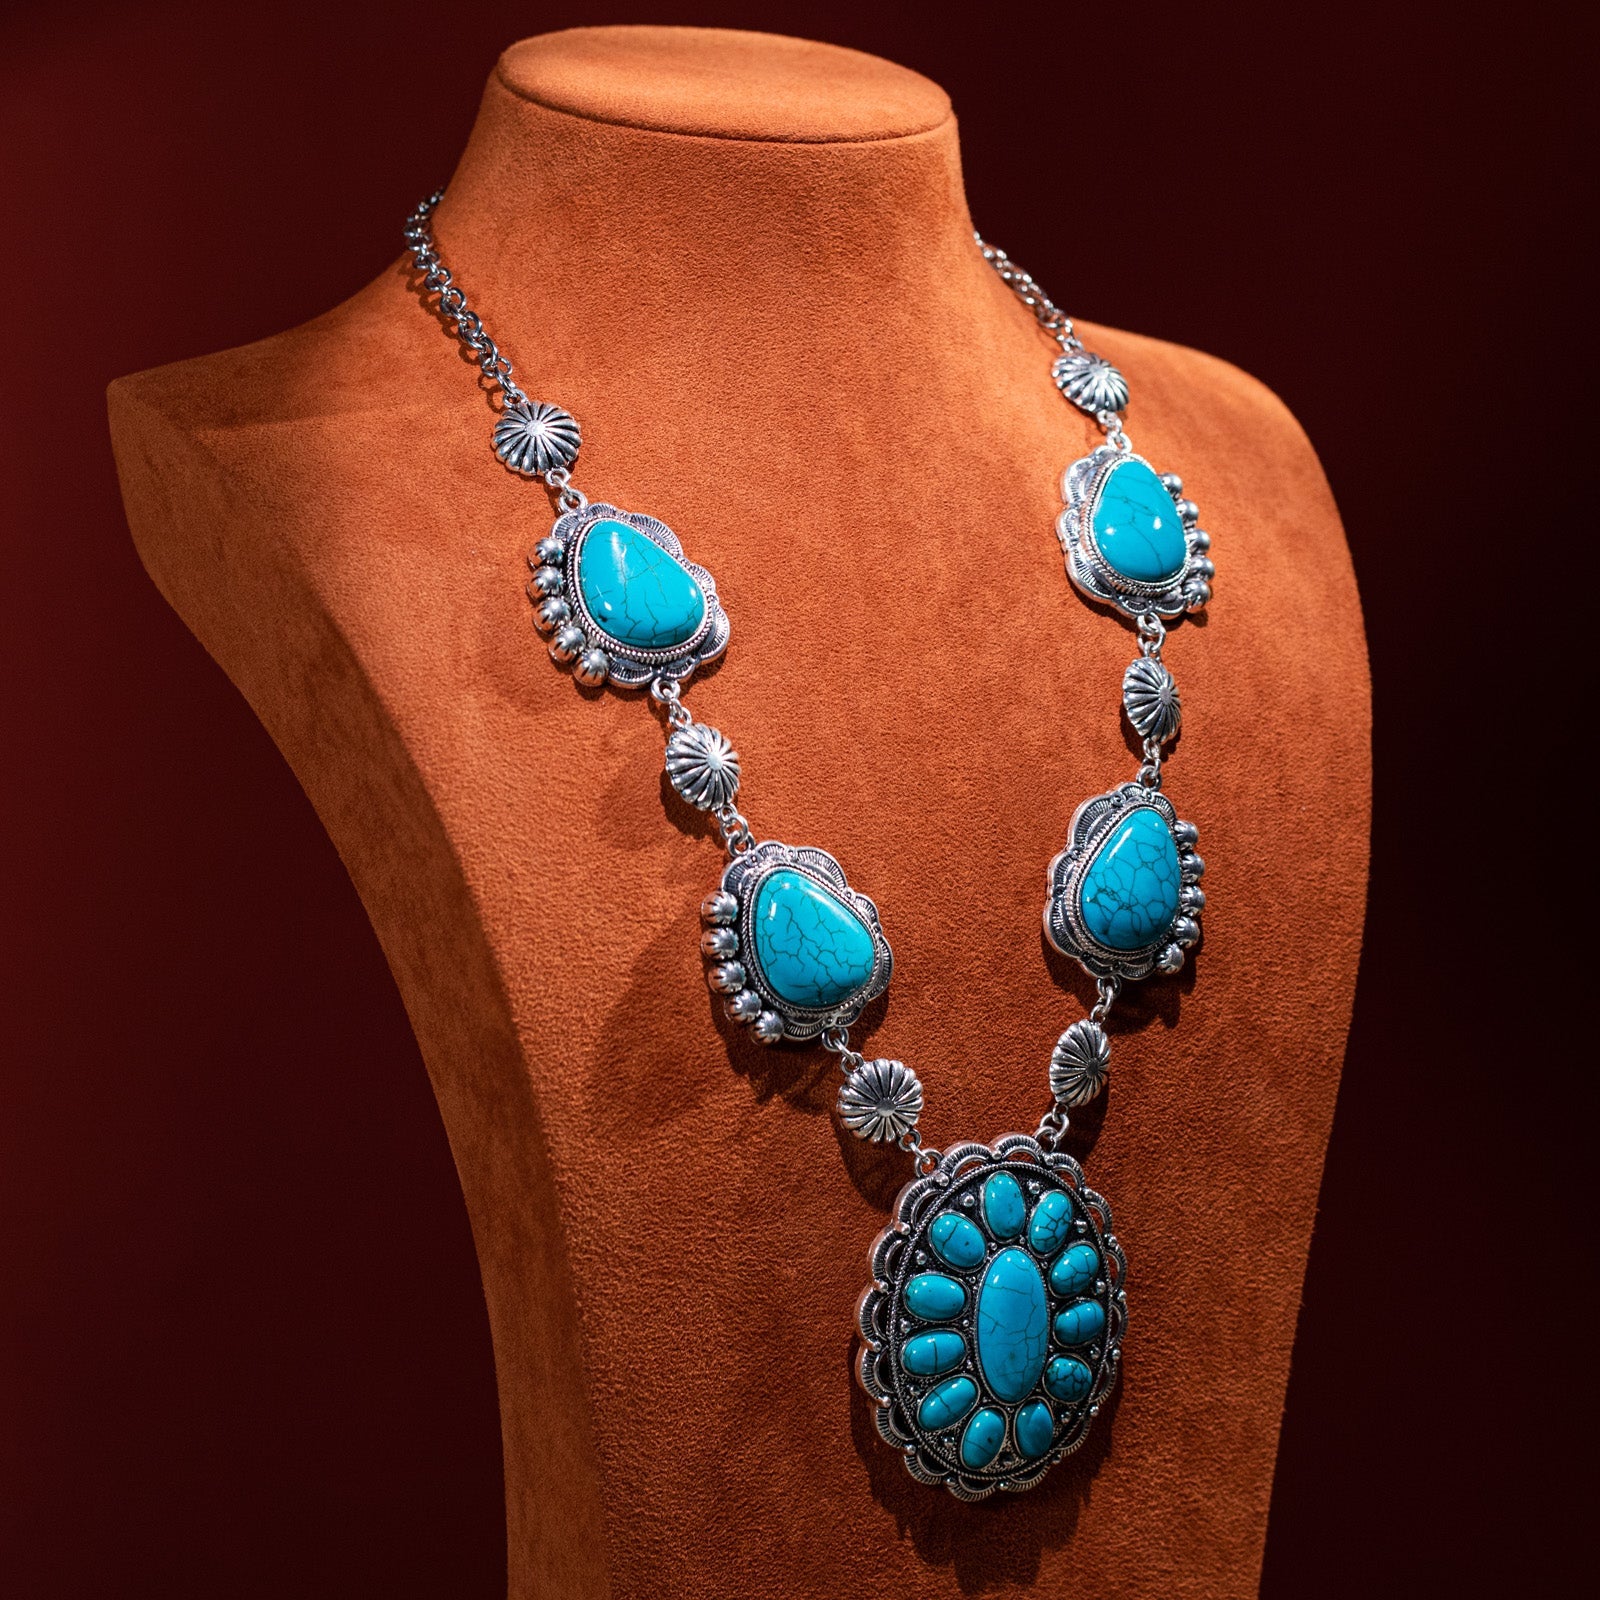 Rustic Couture Turquoise Concho Statement Necklace - Montana West World